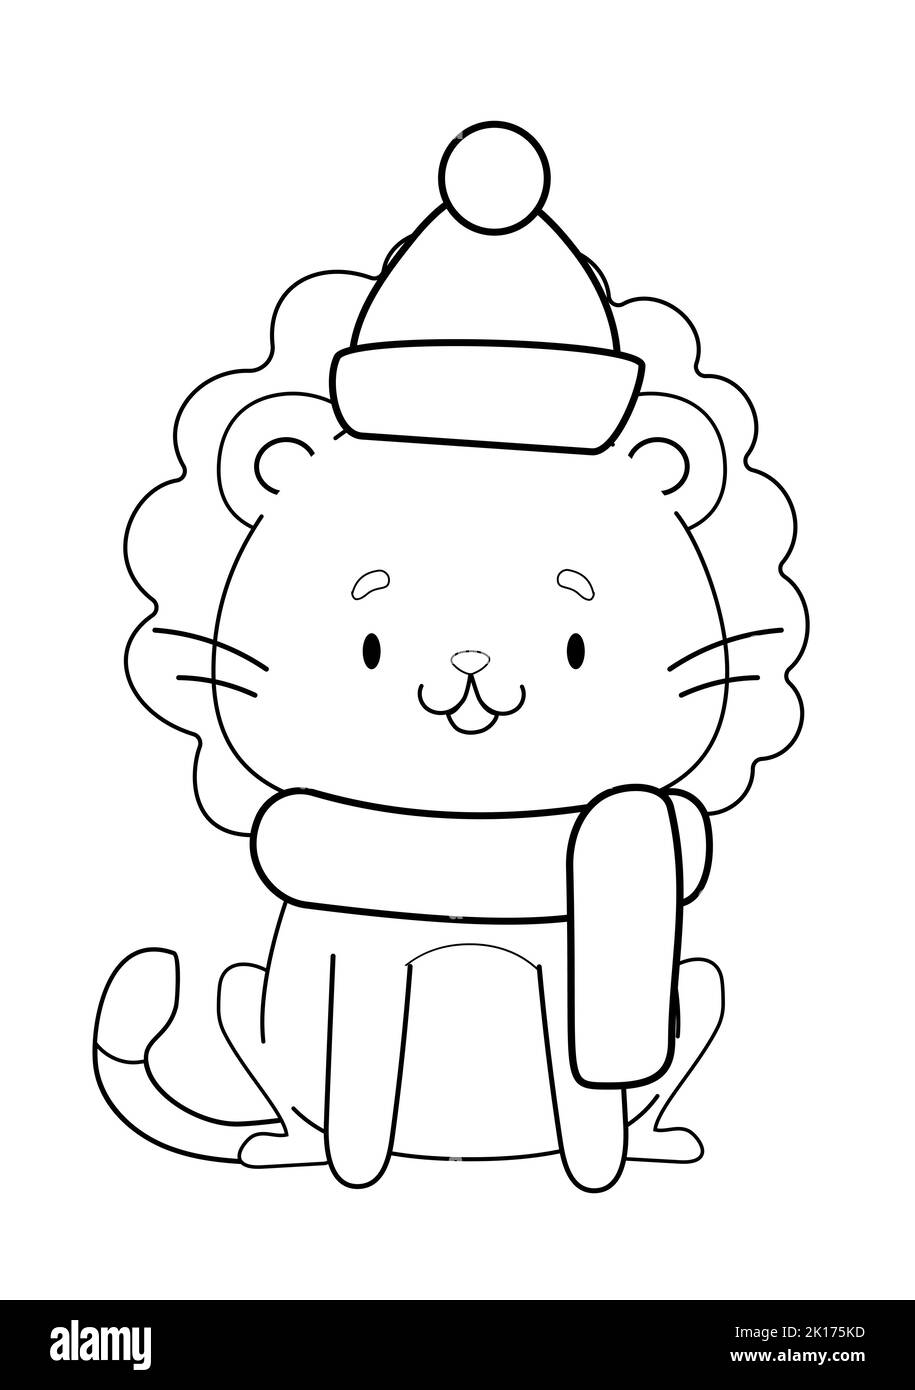 coloring book with a cute lion in a hat and scarf Stock Vector